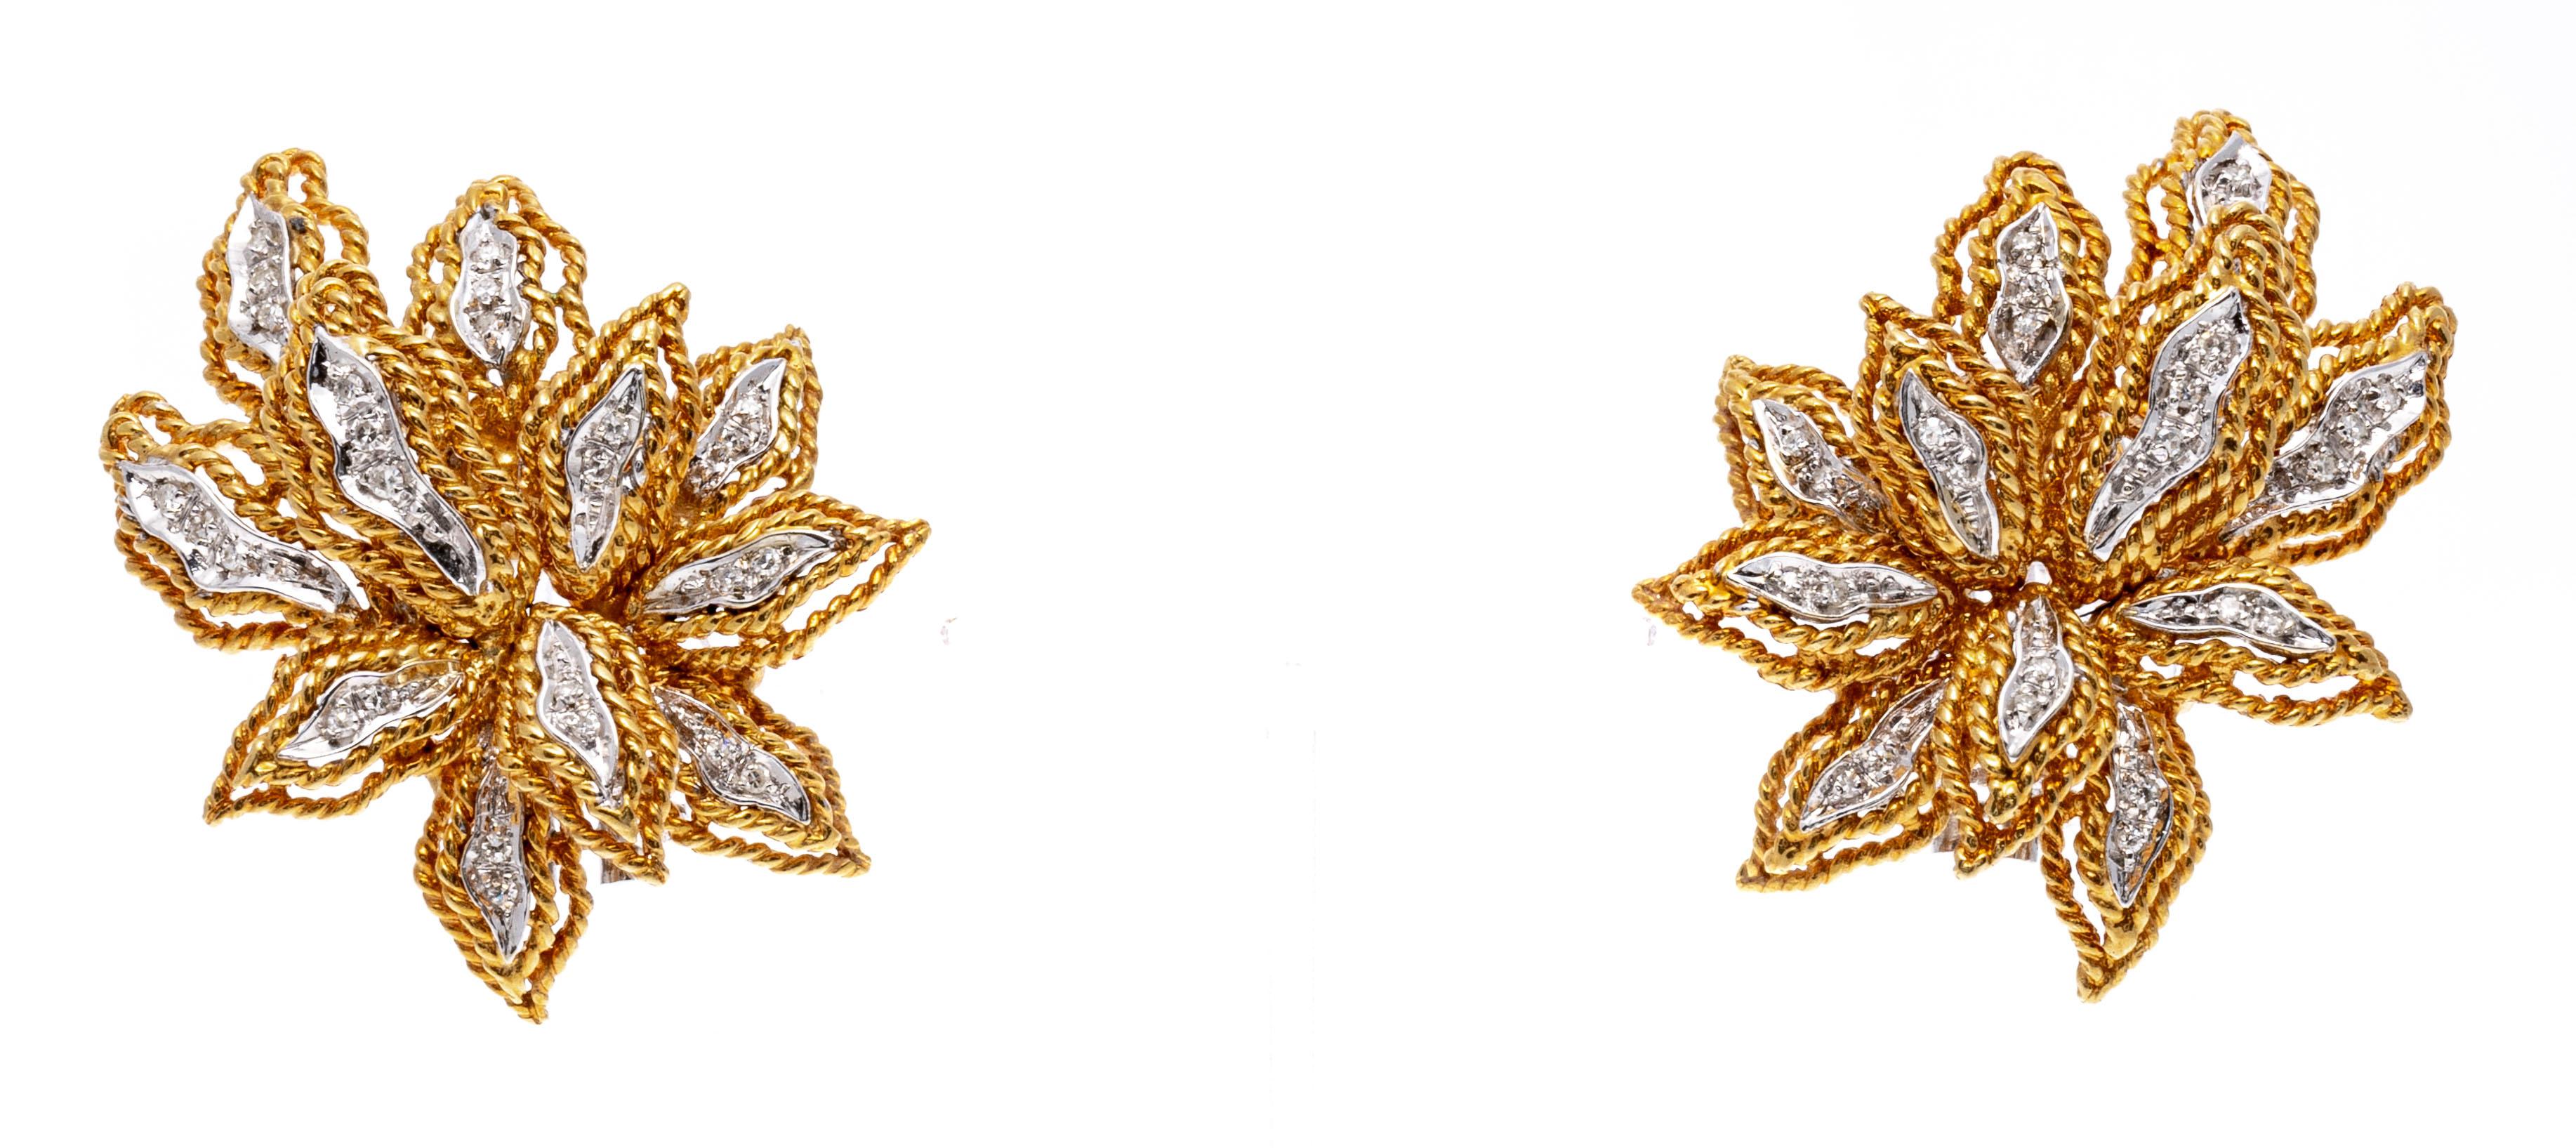 18k Yellow Gold Glamorous Diamond Set Leaf Motif Earrings, App. 0.13 TCW
These glamorous earrings are a leaf cluster motif, decorated with round faceted diamonds, approximately 0.13 TCW, and trimed with a double rope edge. The earrings have no